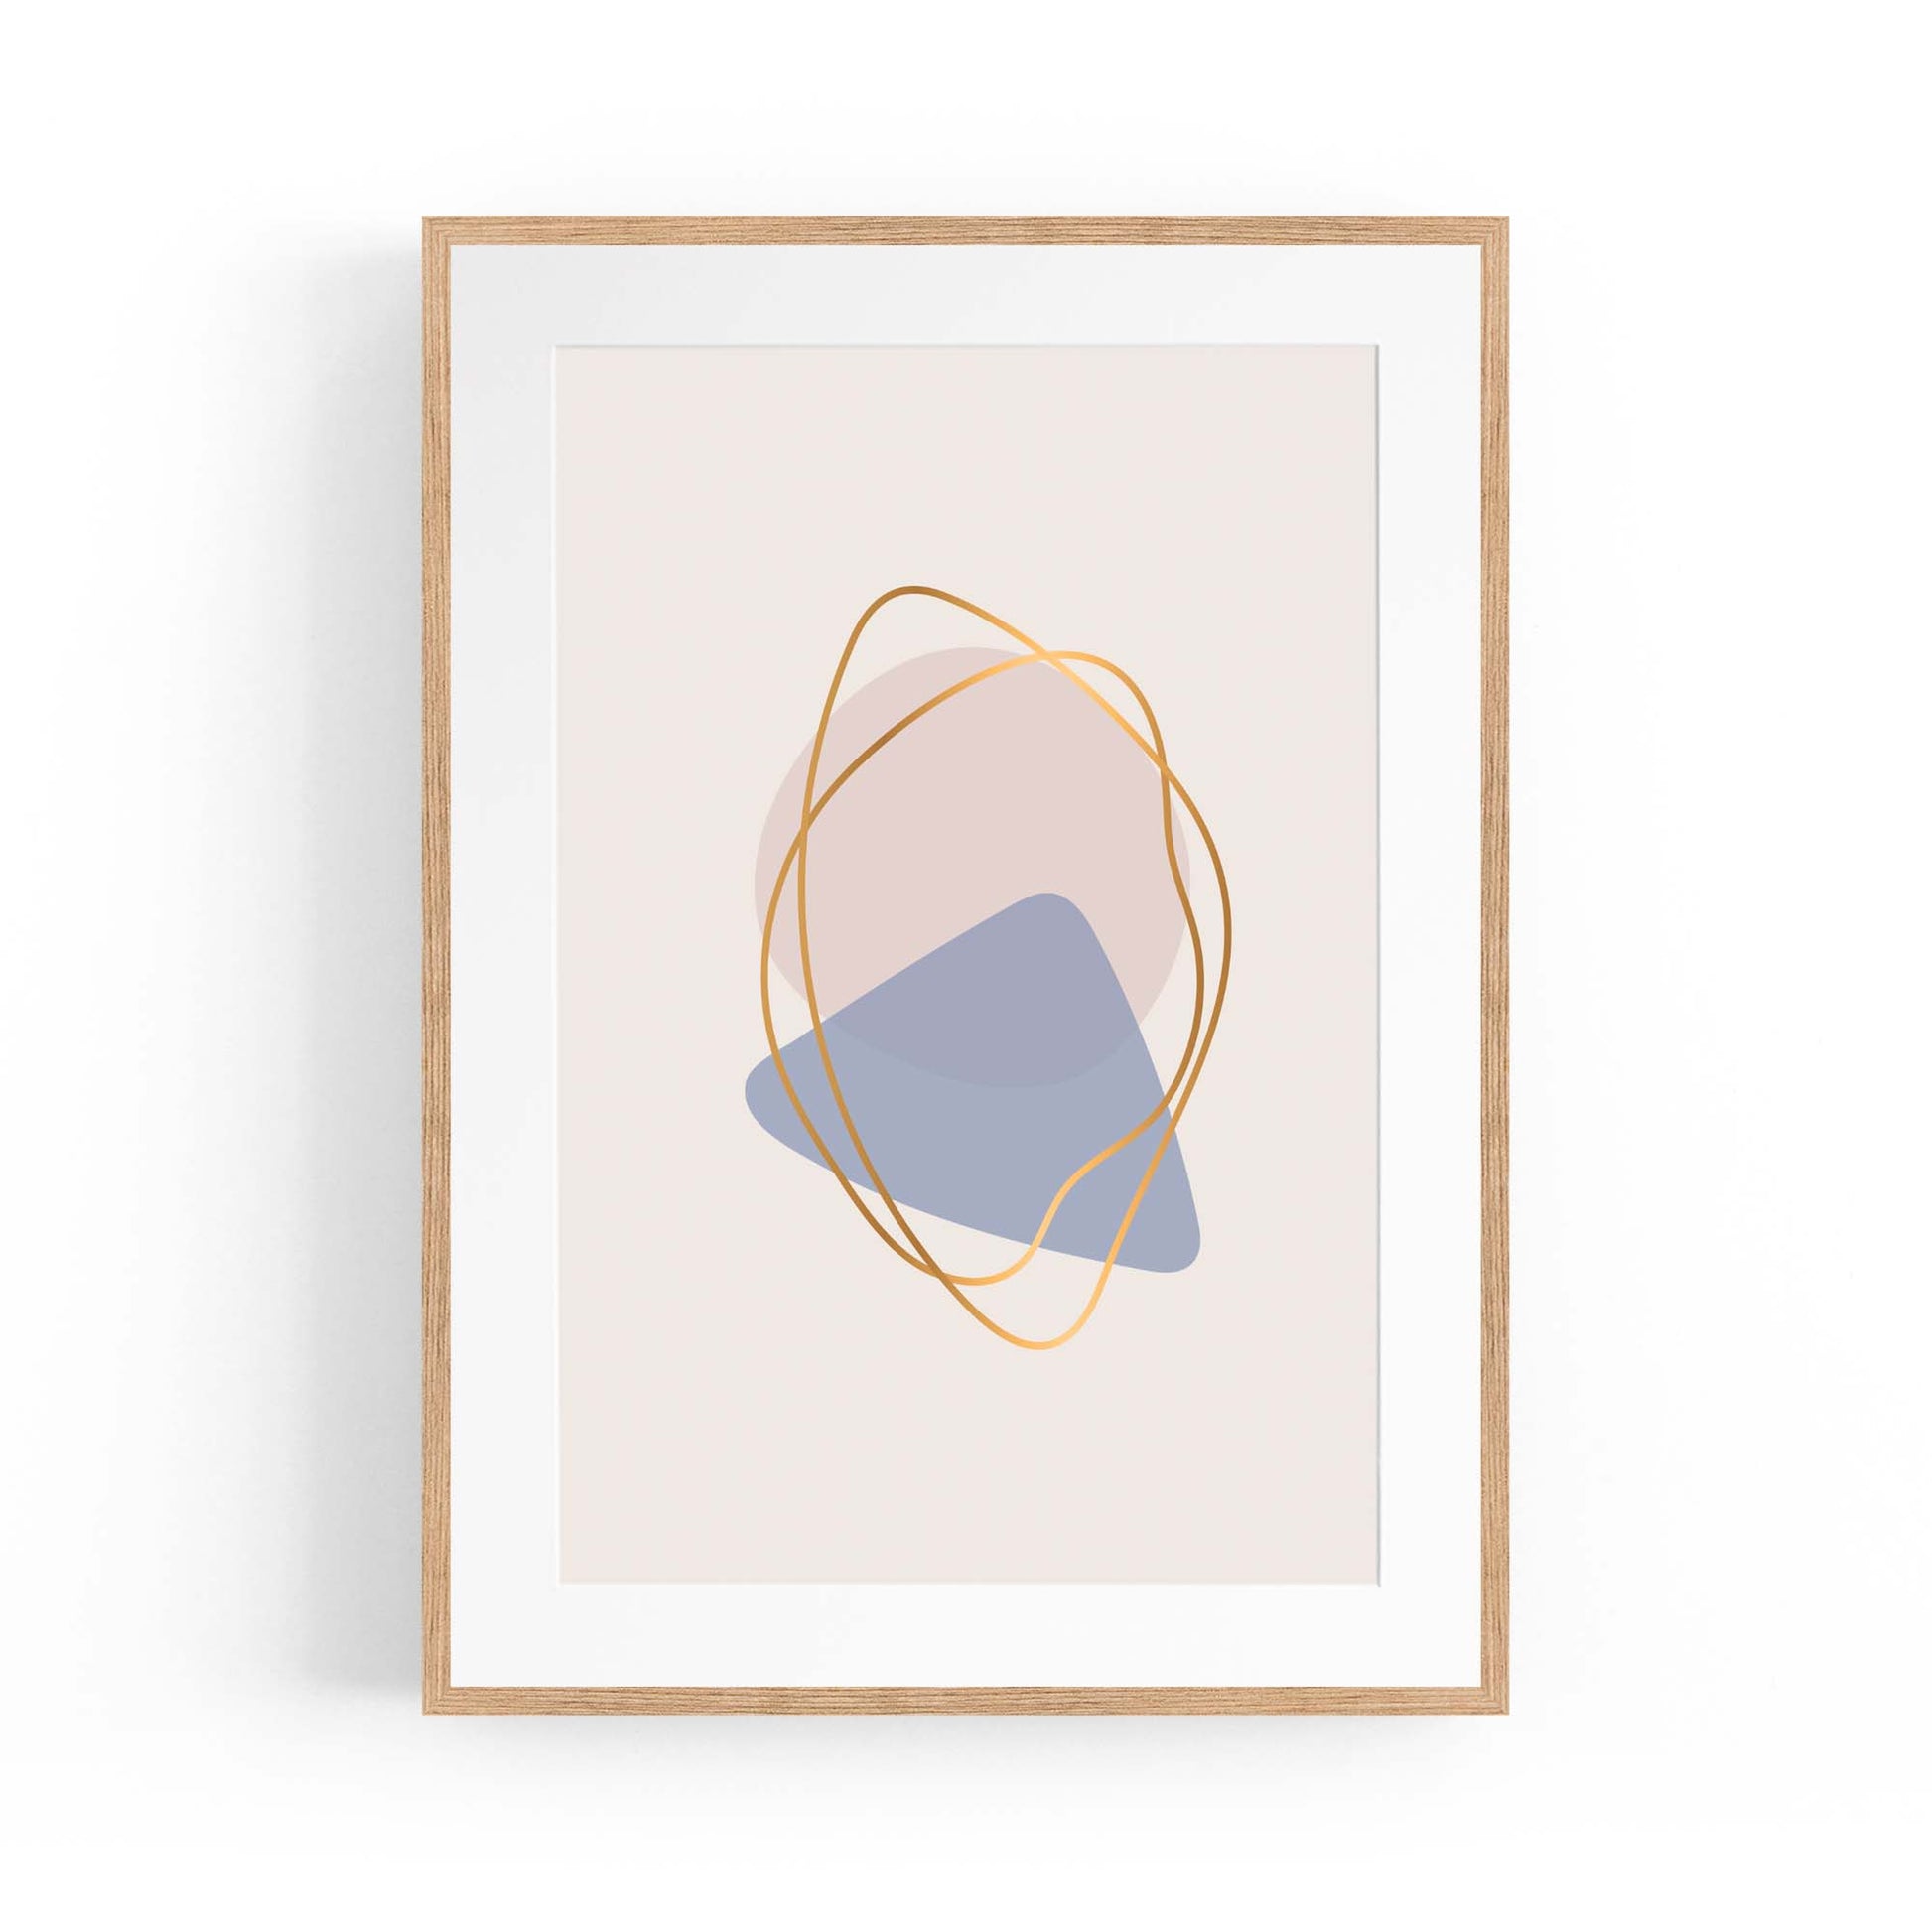 Pale Abstract Shapes Wall Art #7 - The Affordable Art Company